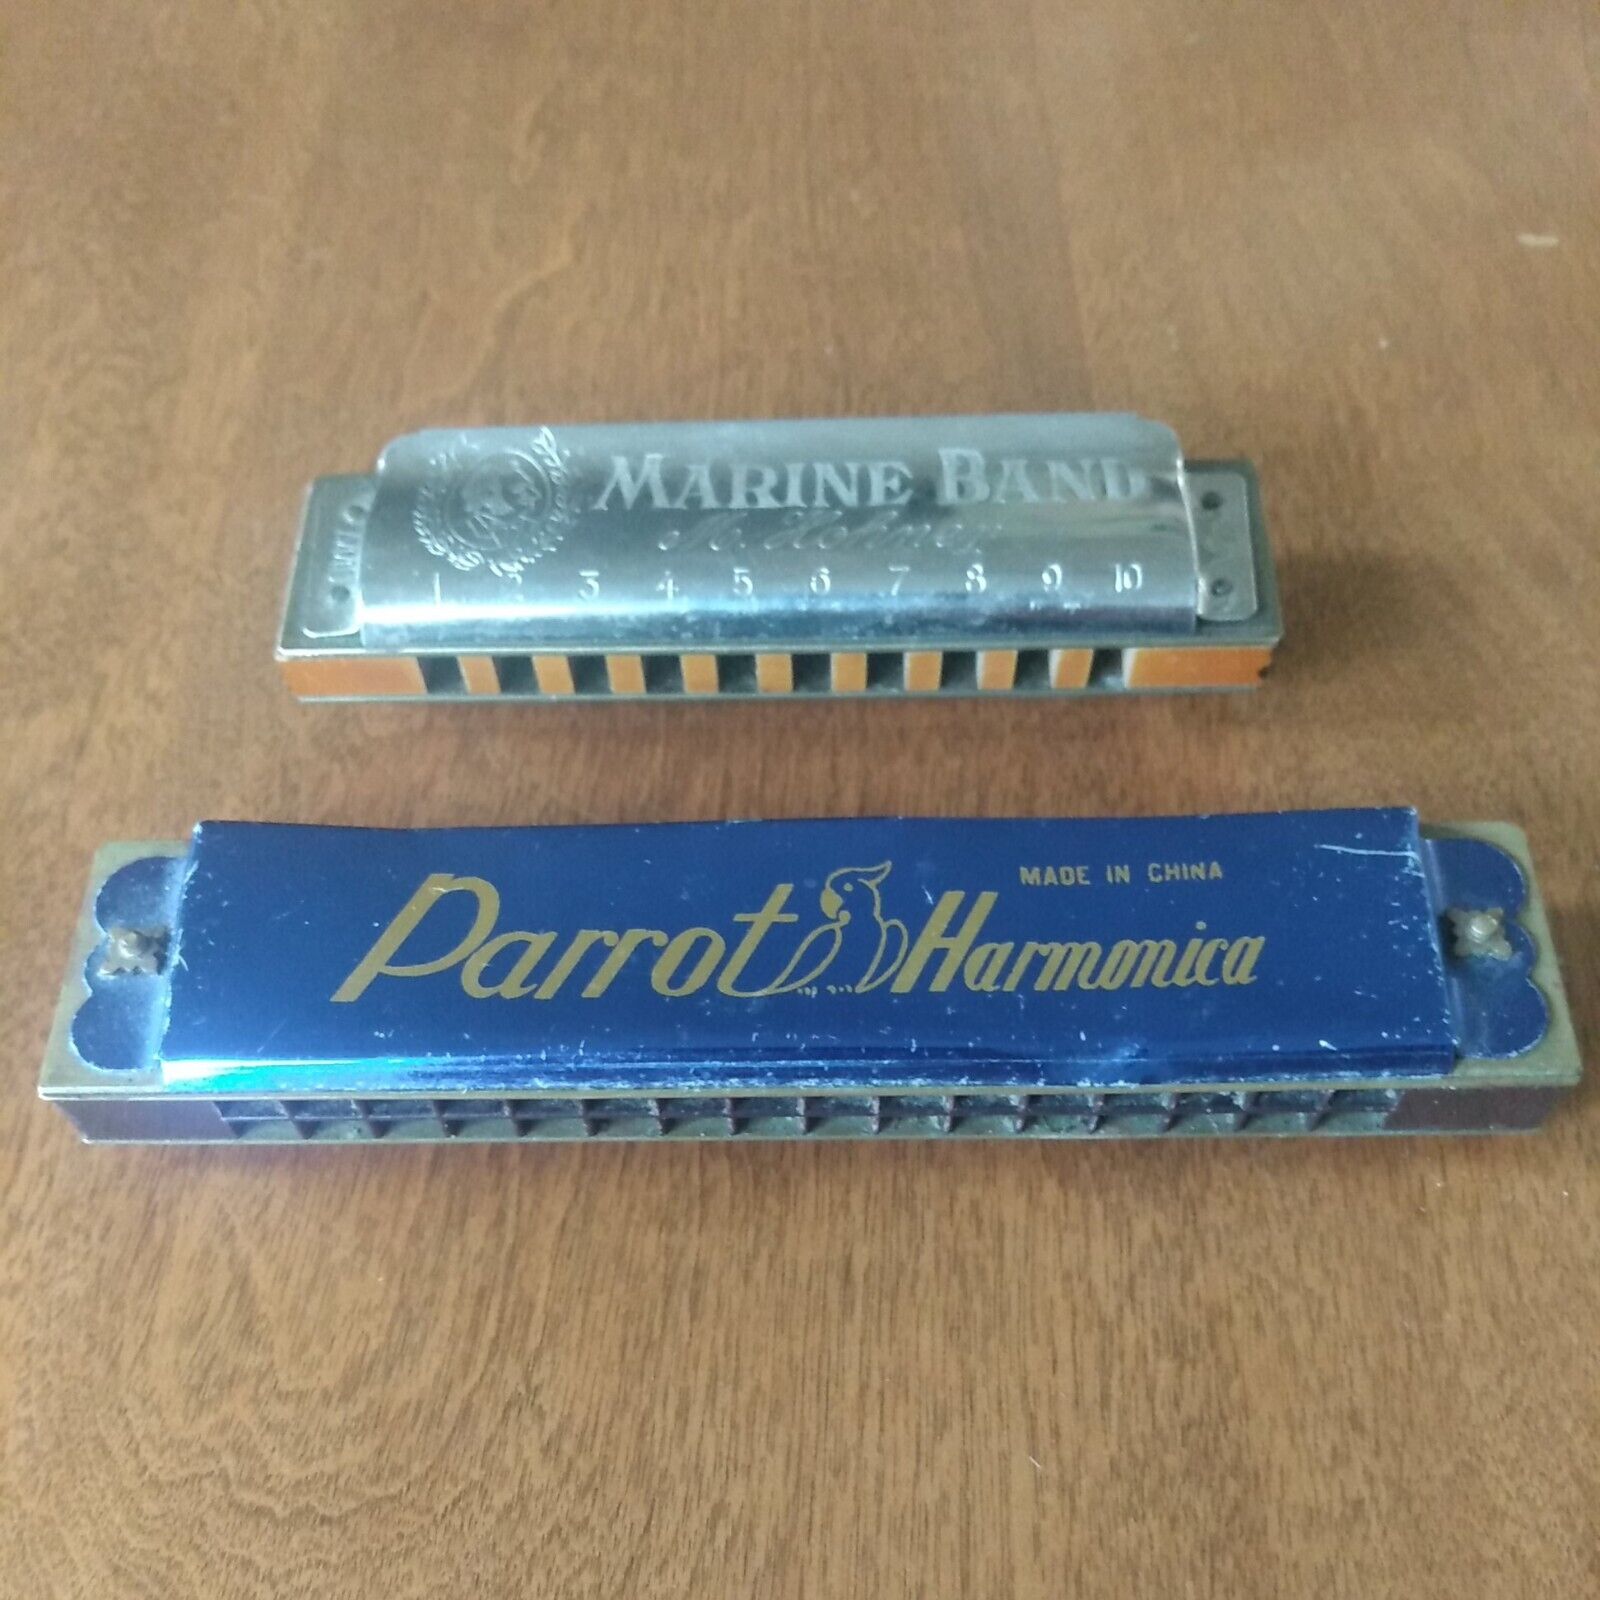 Bundle Of Two Loose Harmonicas - Parrot, Hohner Marine Band